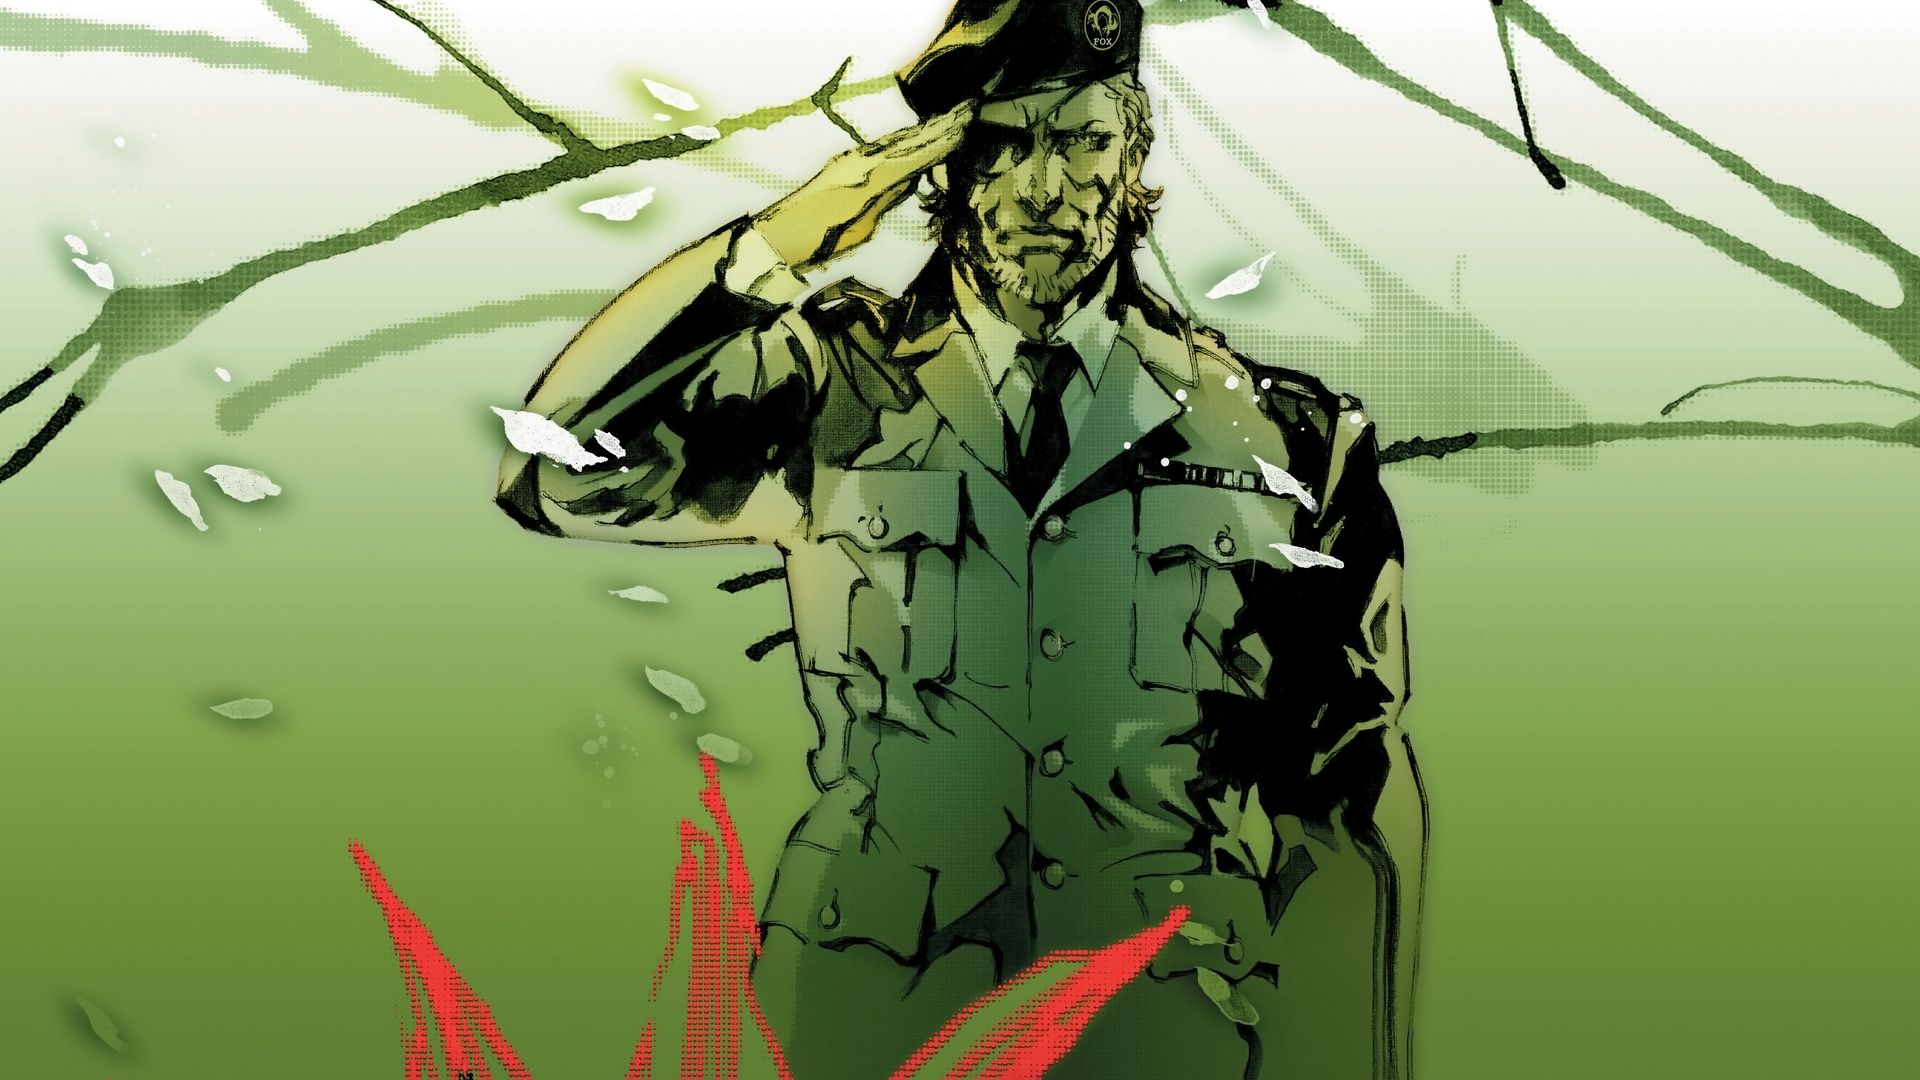 Video Game Metal Gear Solid 3 Snake Eater 1920x1080